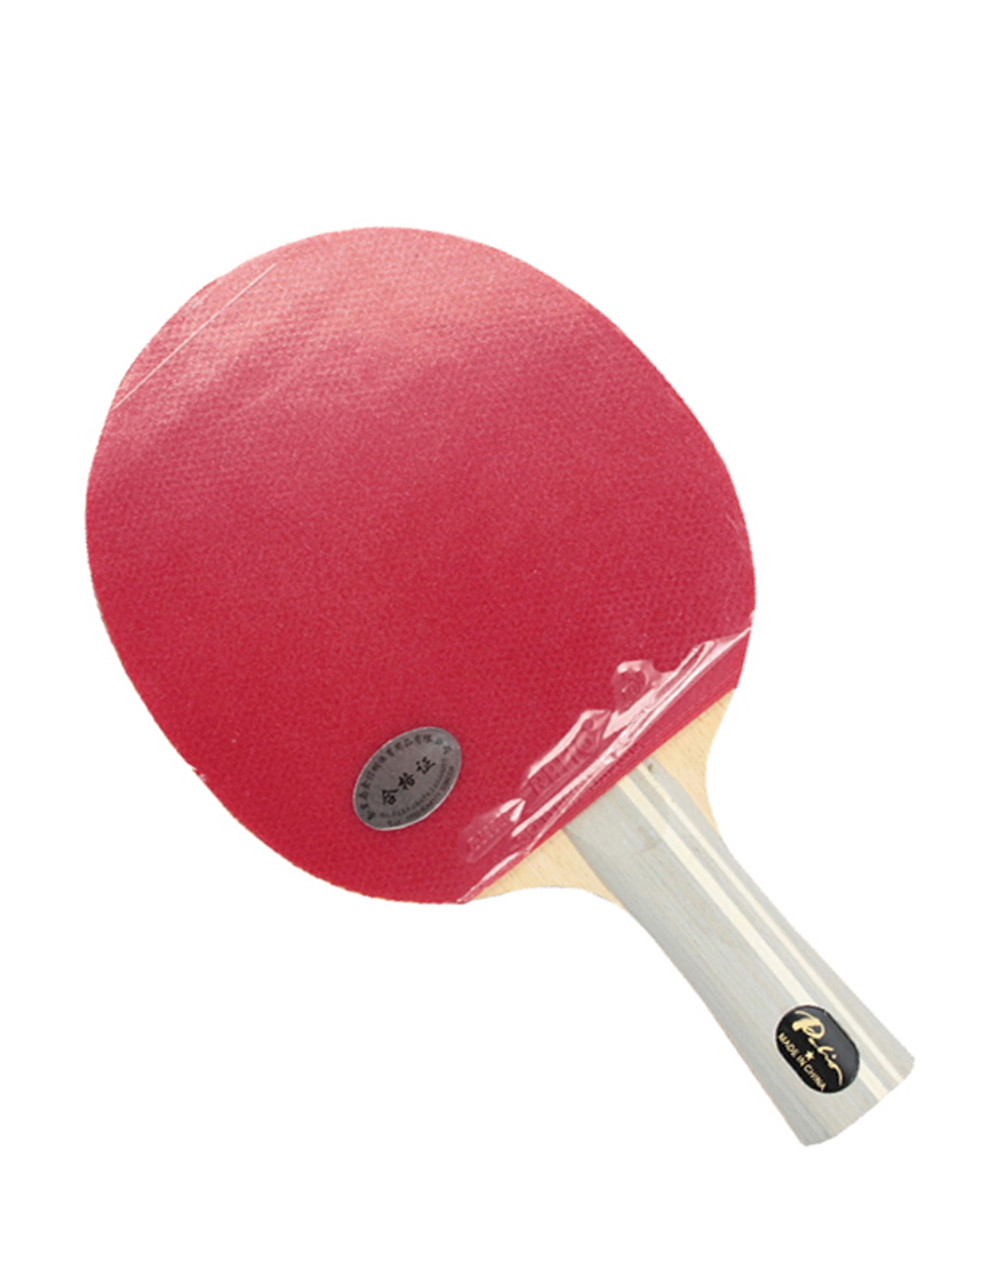 Ping Pong Paddle Palio 2 Stars Table Tennis Bat FREE Delivery 